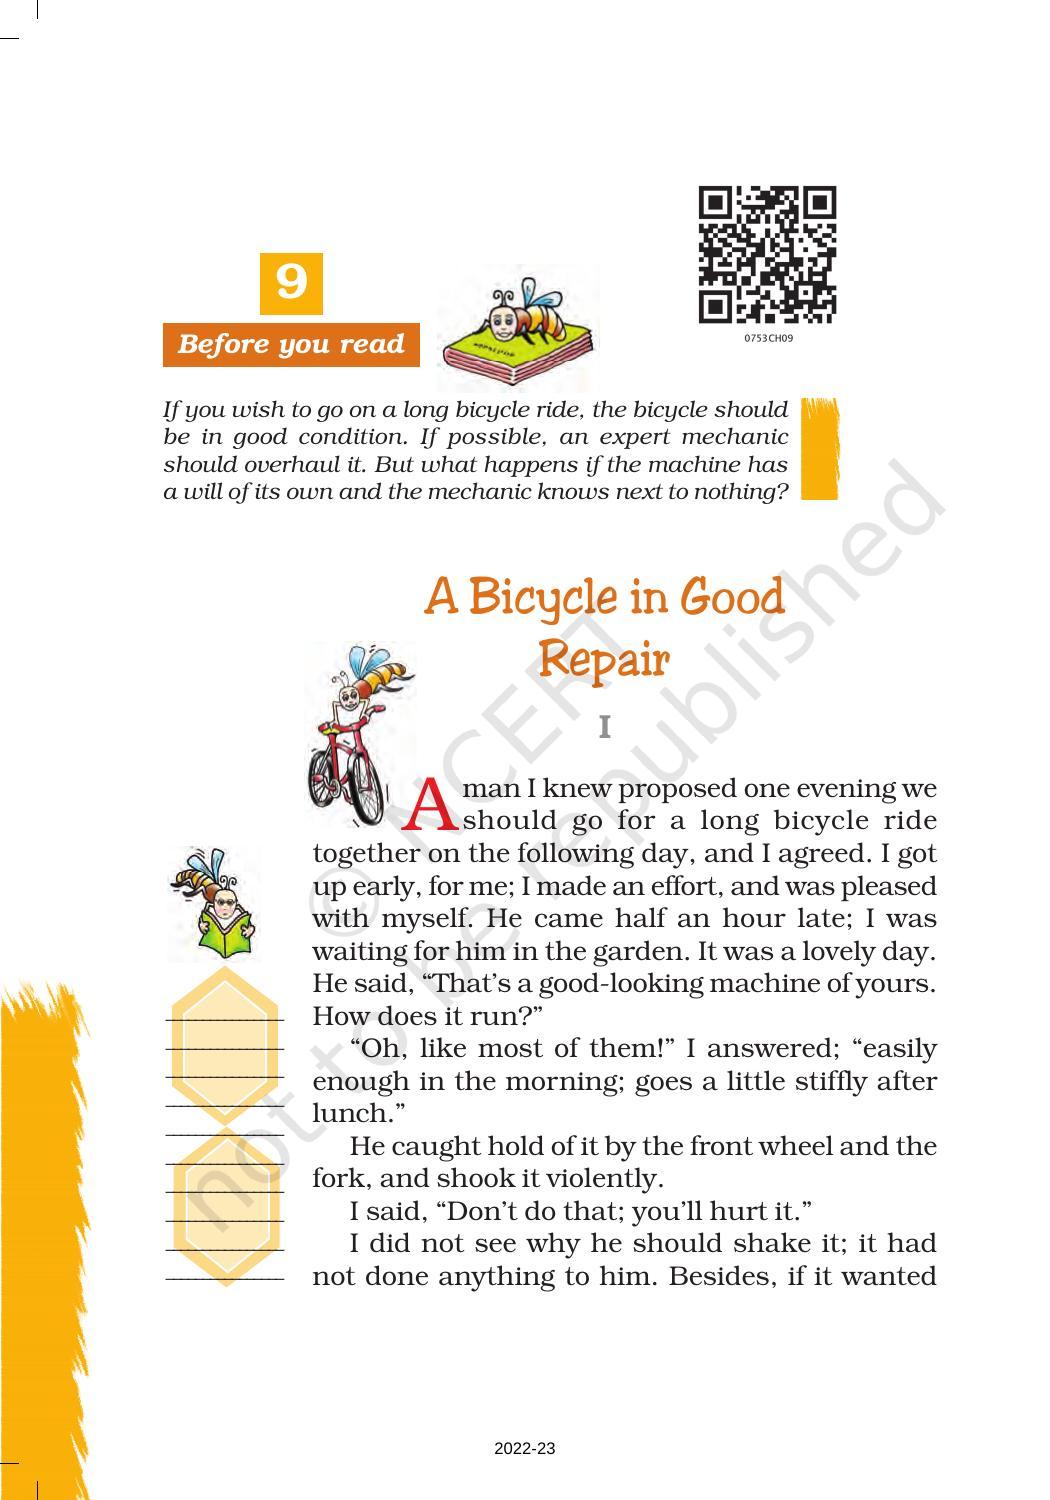 NCERT Book for Class 7 English (Honeycomb): Chapter 9-A Bicycle in Good Repair - Page 1